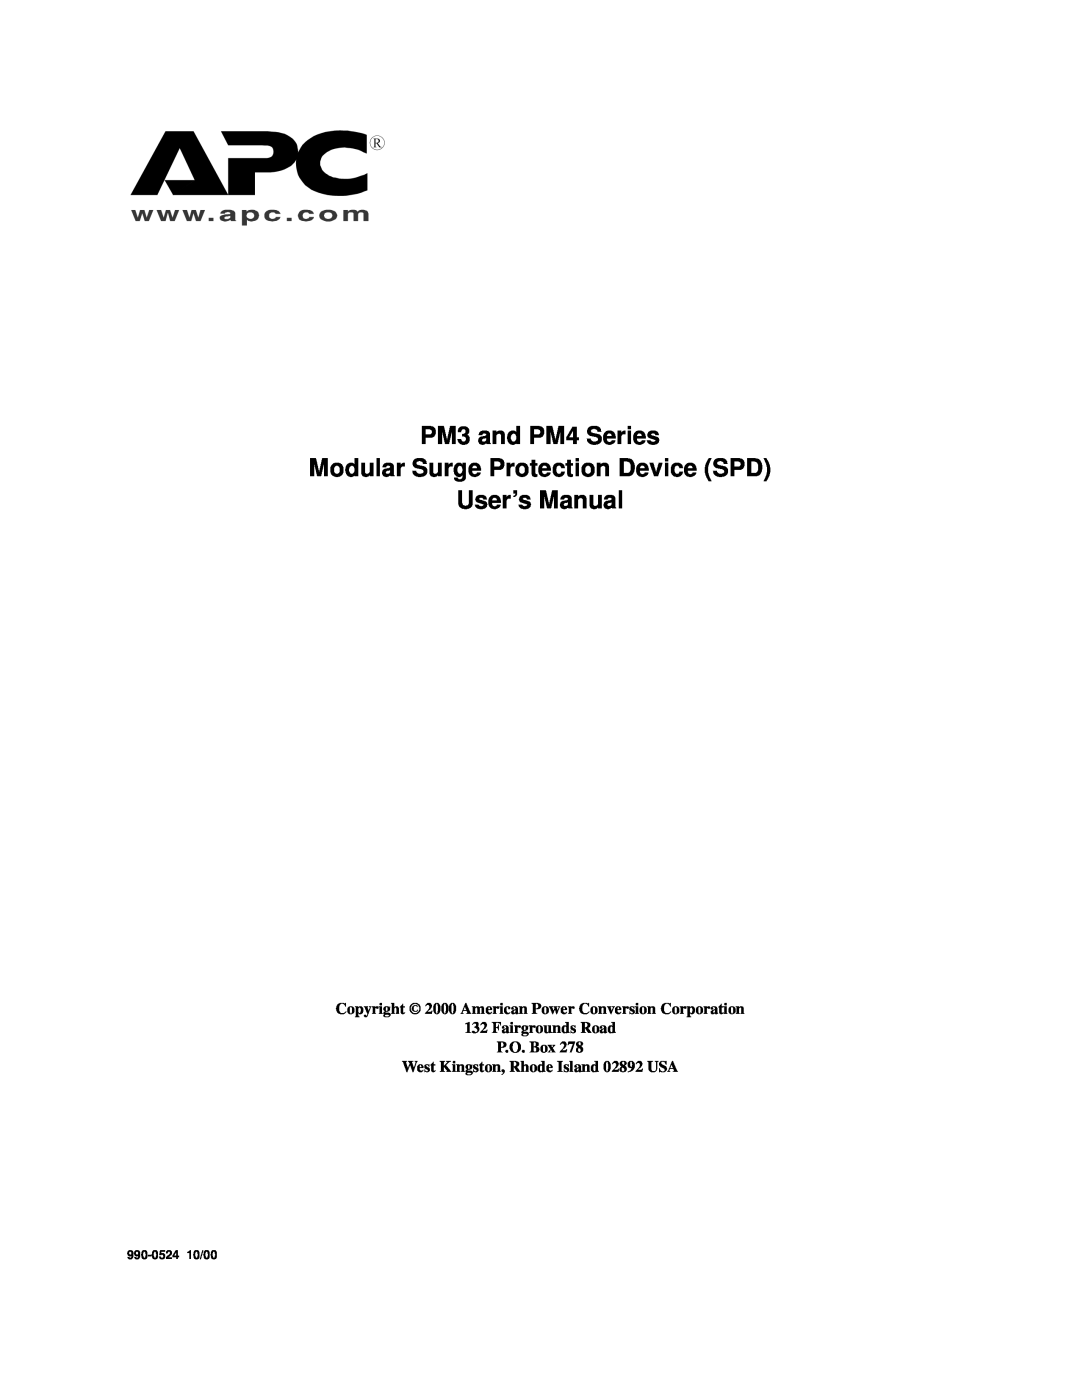 APC user manual PM3 and PM4 Series Modular Surge Protection Device SPD User’s Manual, 990-0524 10/00 